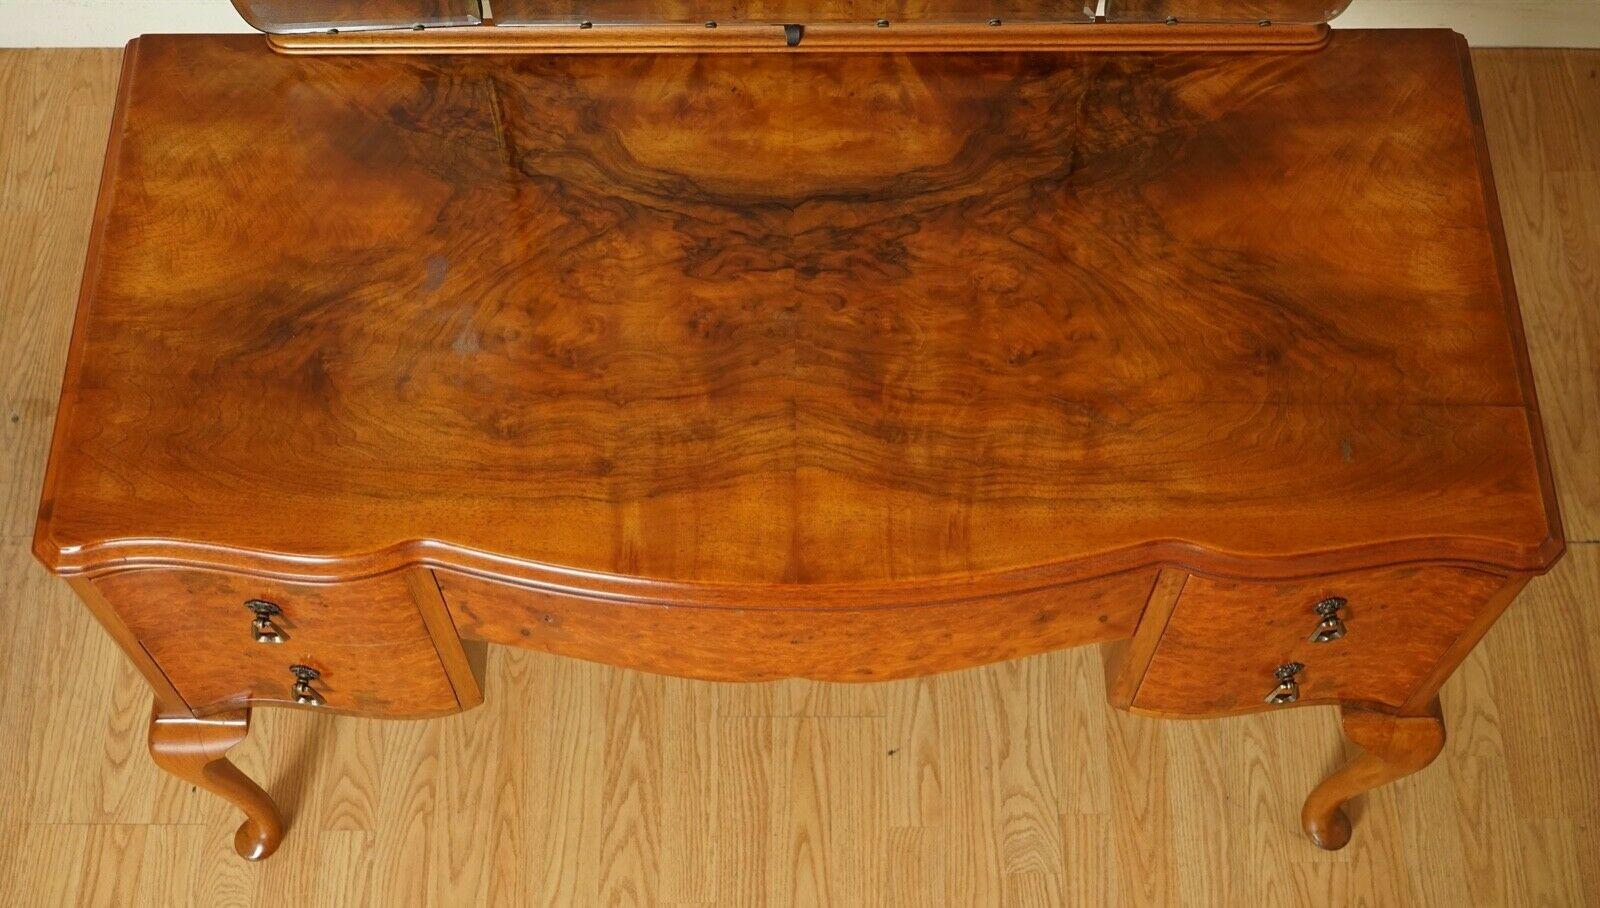 20th Century Stunning Vintage Art Deco Burr Walnut Dressing Table with Queen Anne Legs